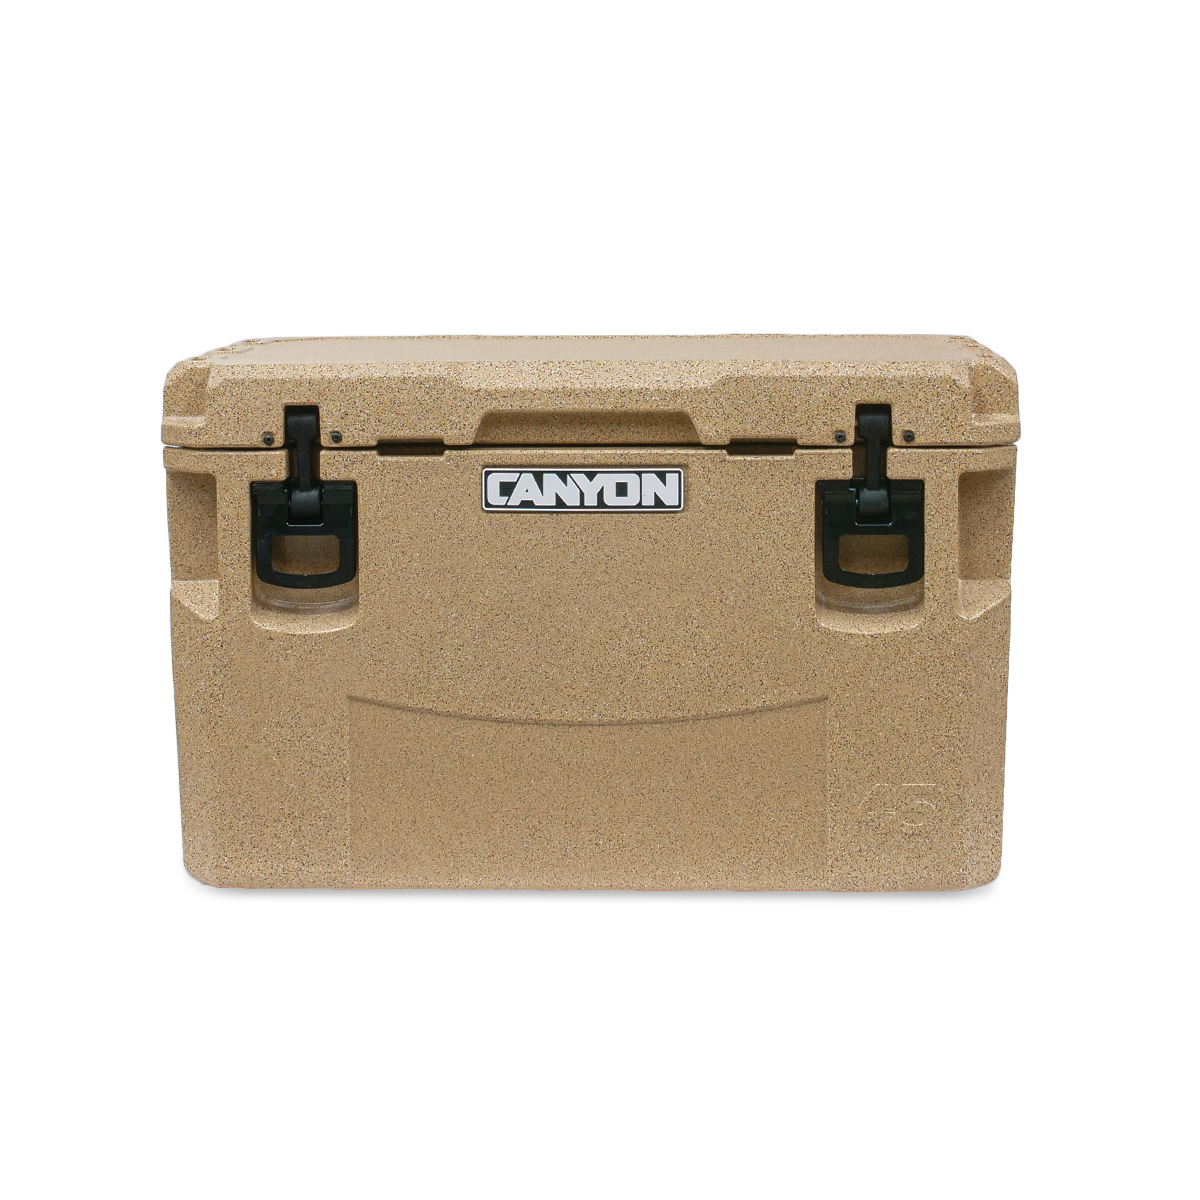 Featuring the PRO Series Coolers cooler, update mayan blue manufactured by Canyon shown here from one angle.